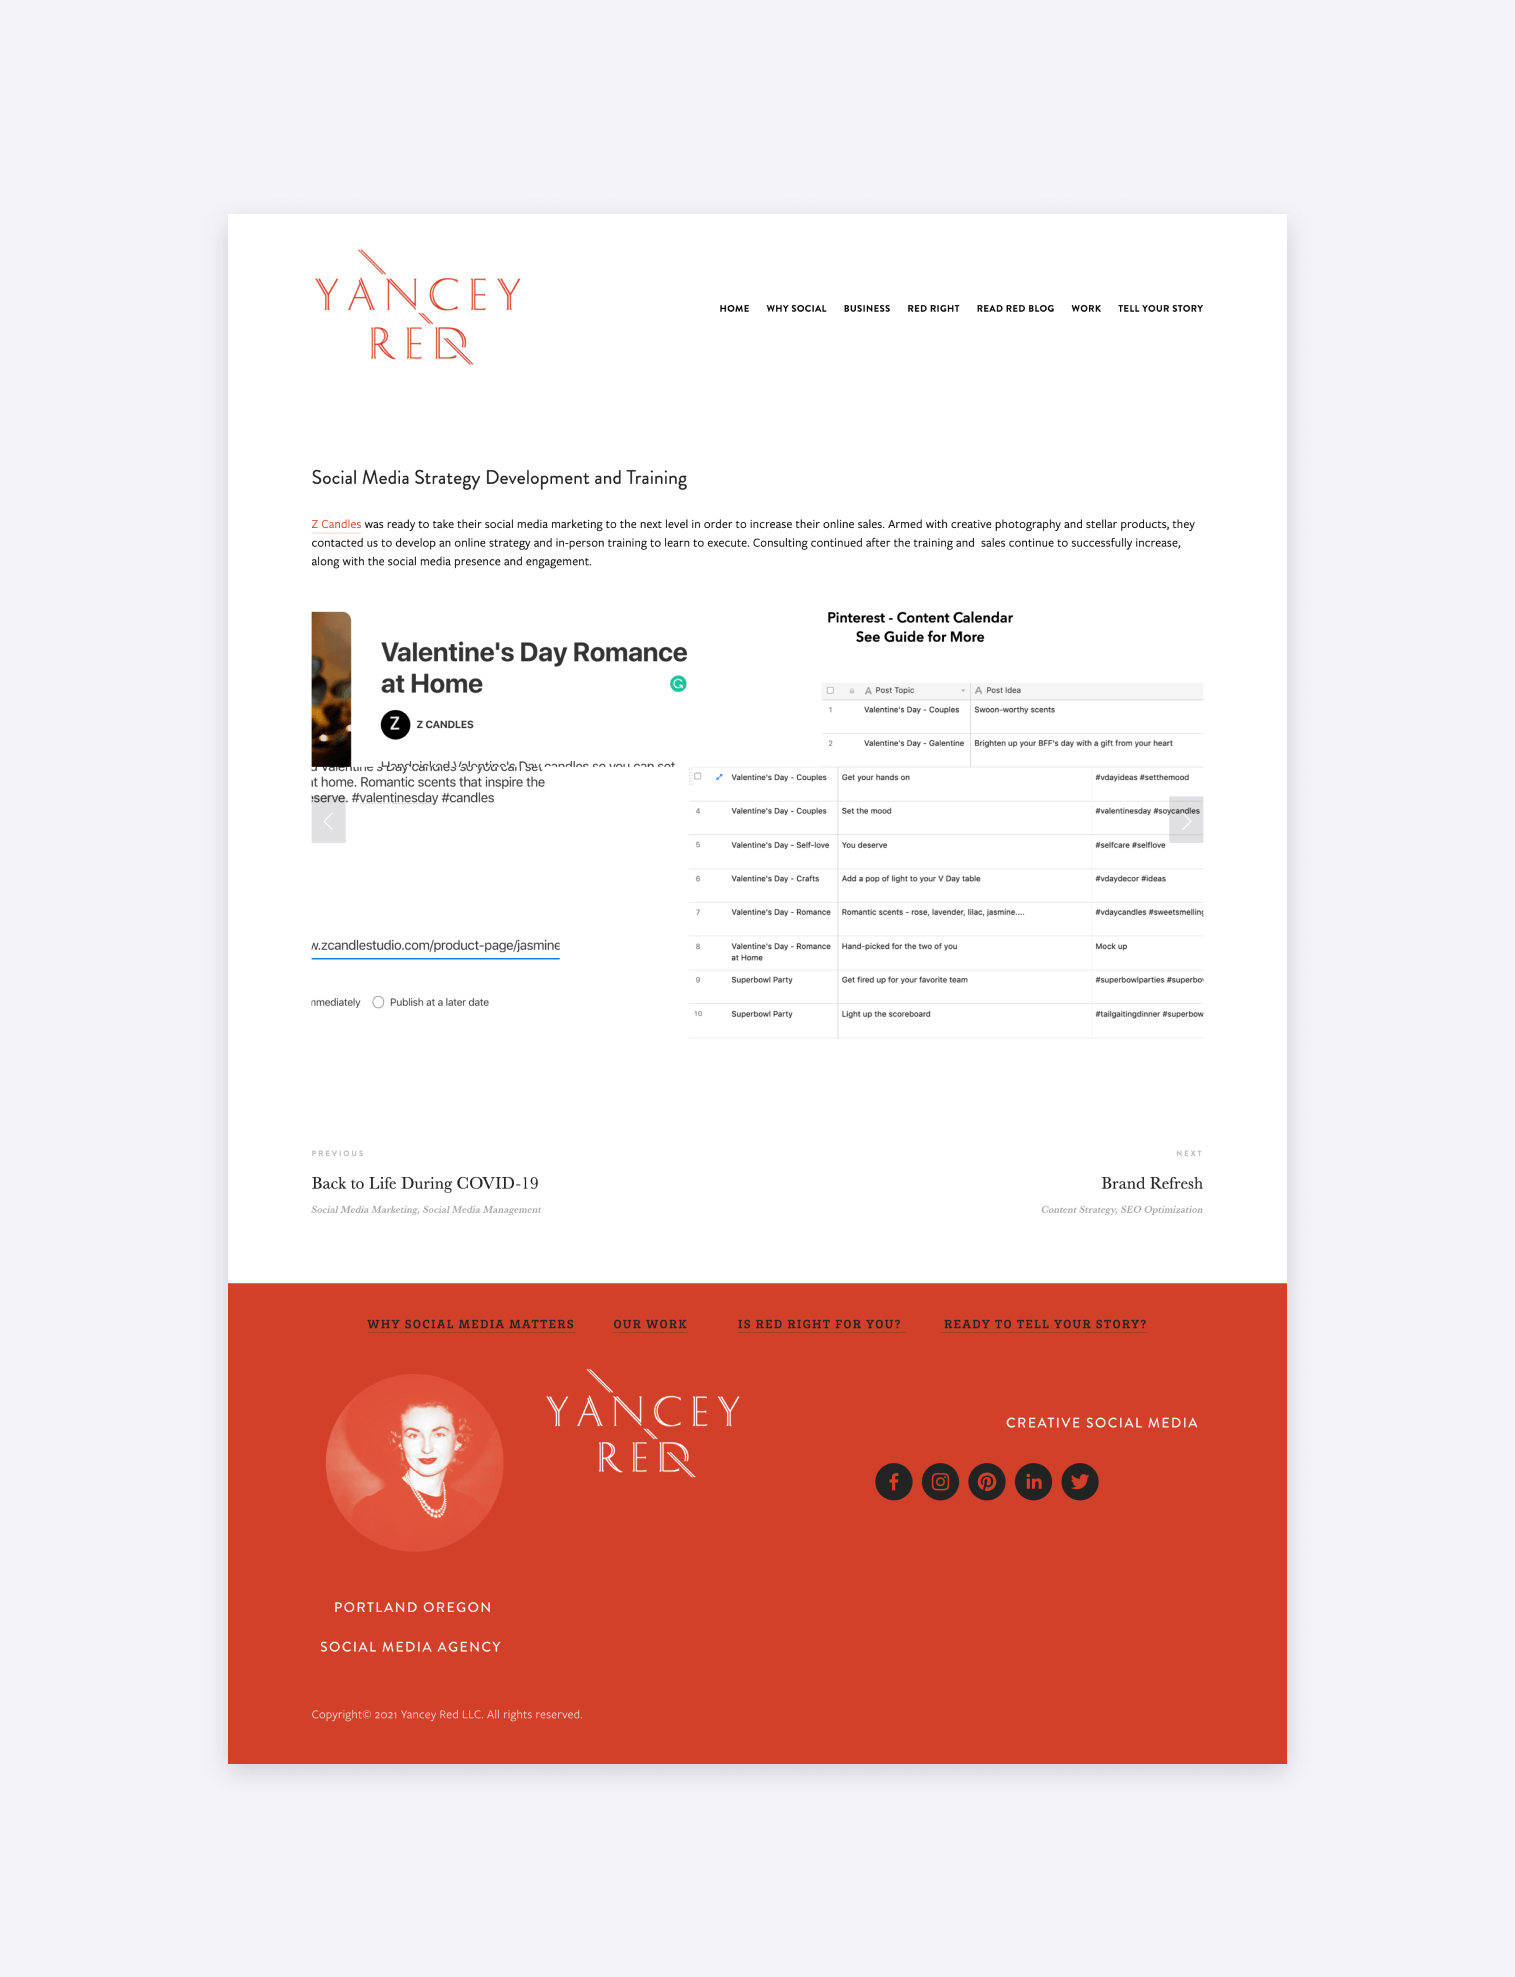 examples of a social media case study by yancey red